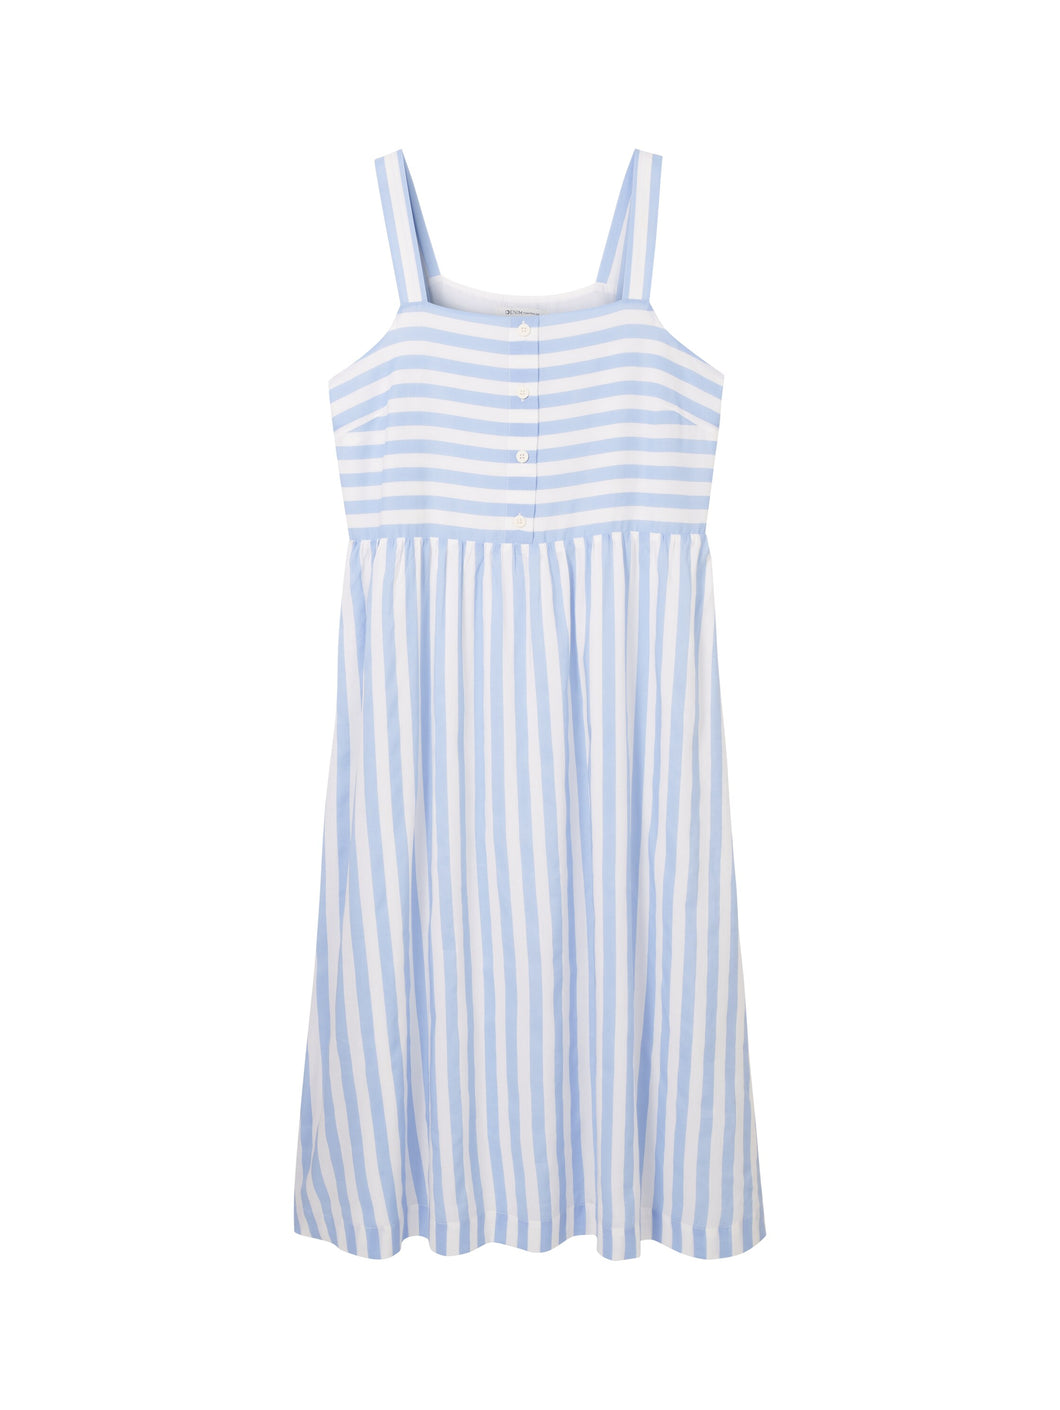 TOM TAILOR DENIM MIDI DRESS WITH BUTTONS mid blue white stripe